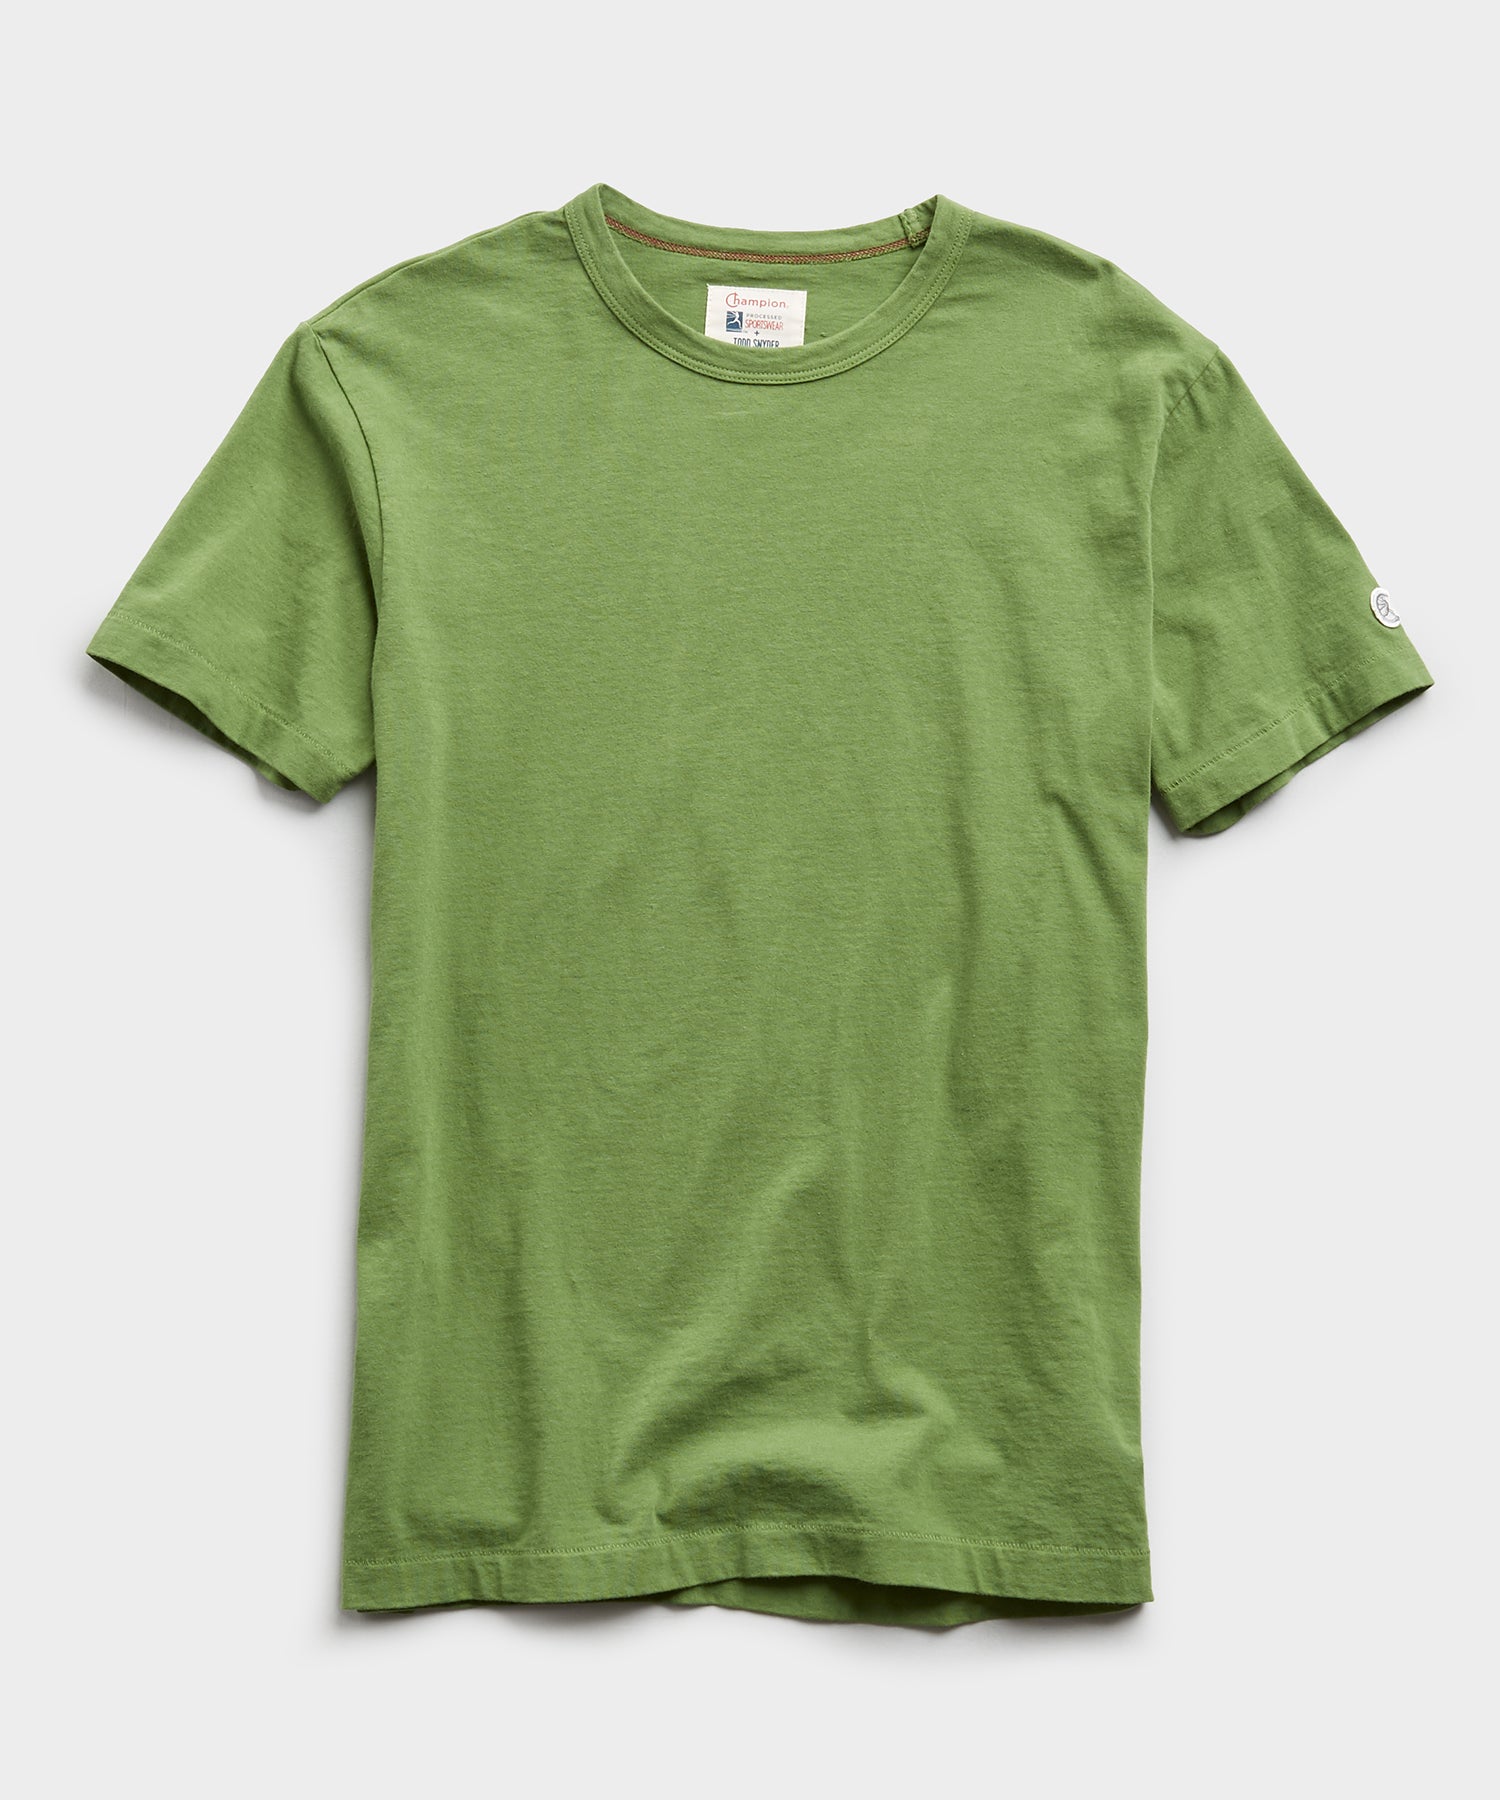 Image of Champion Basic Jersey Tee in Guacamole